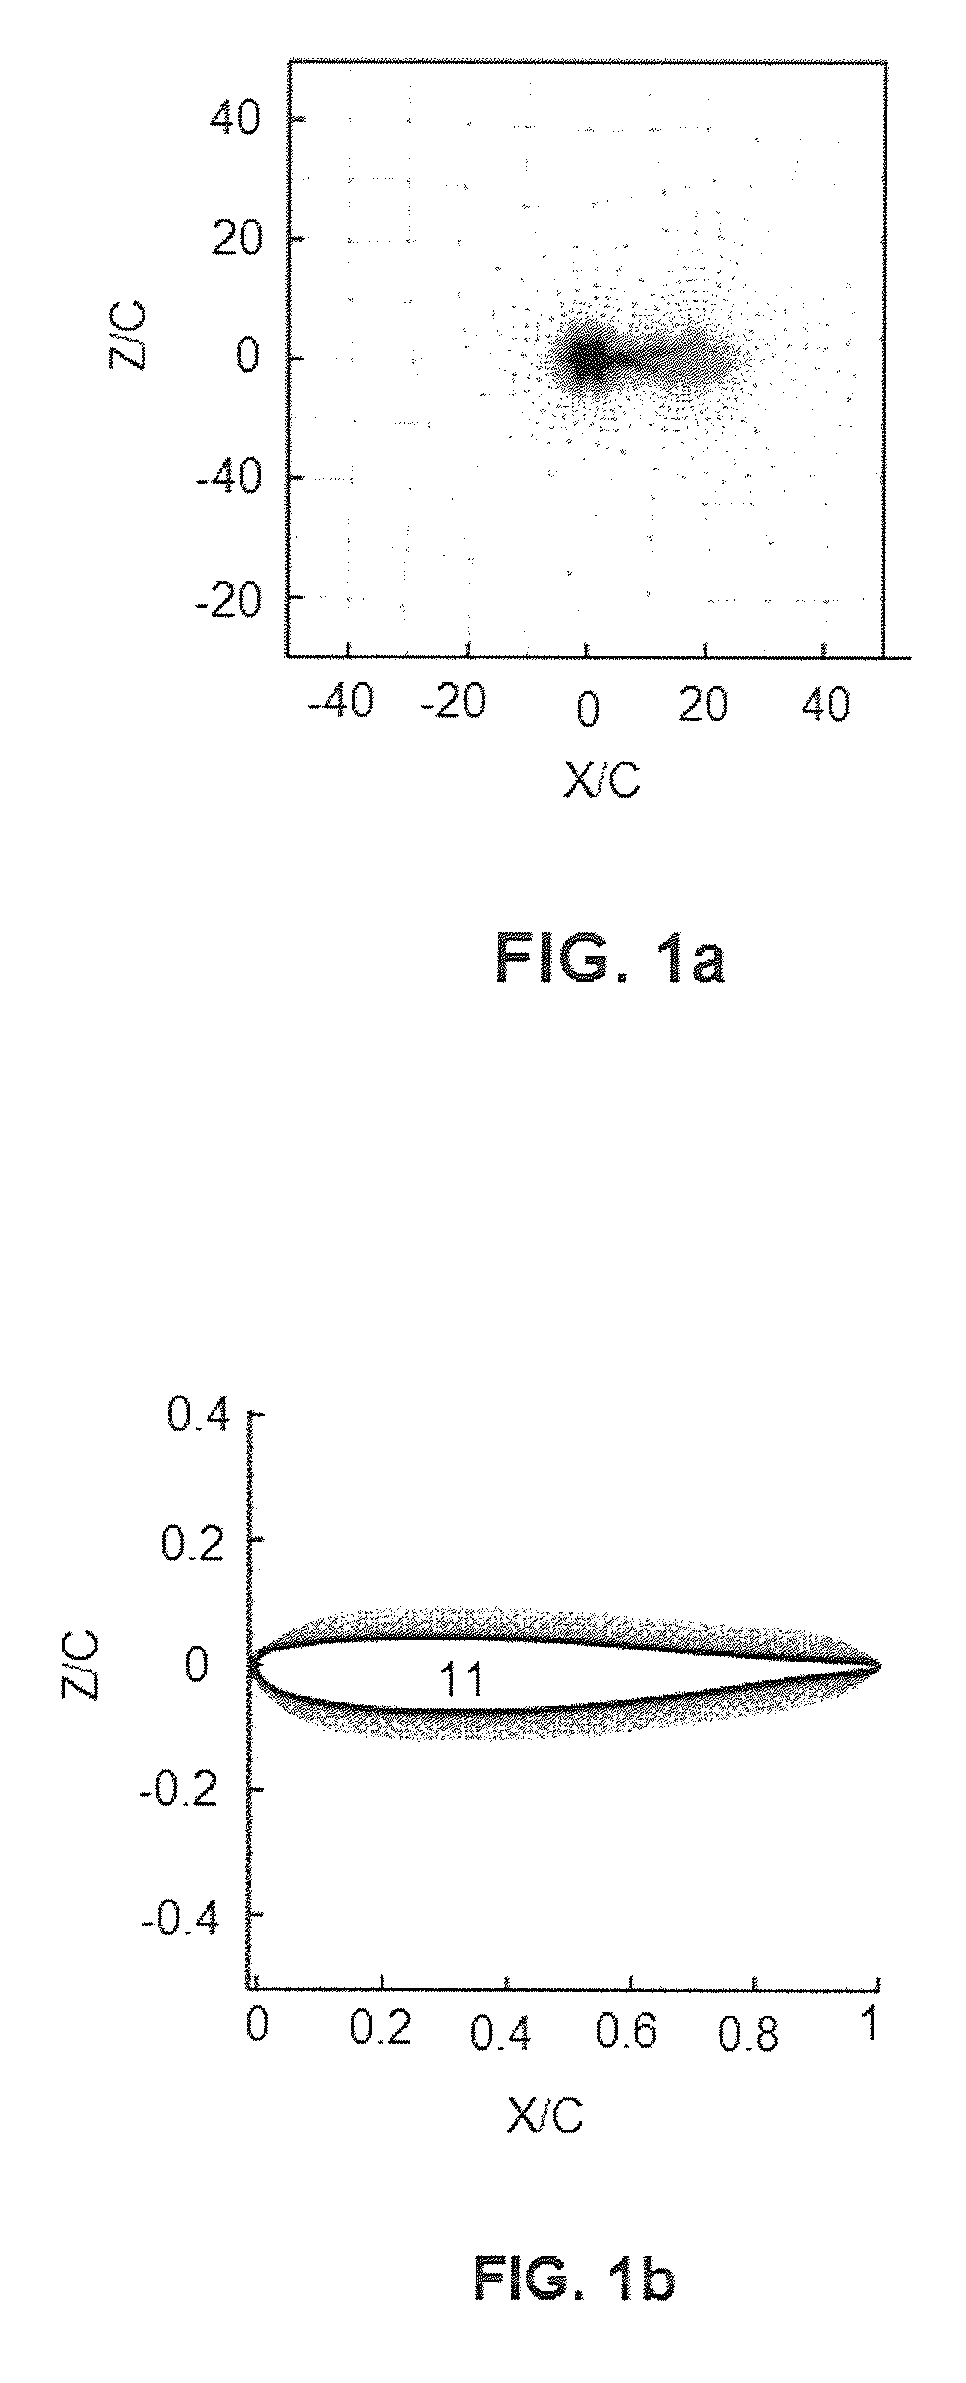 Method and system for a quick calculation of aerodynamic forces on an aircraft in transonic conditions